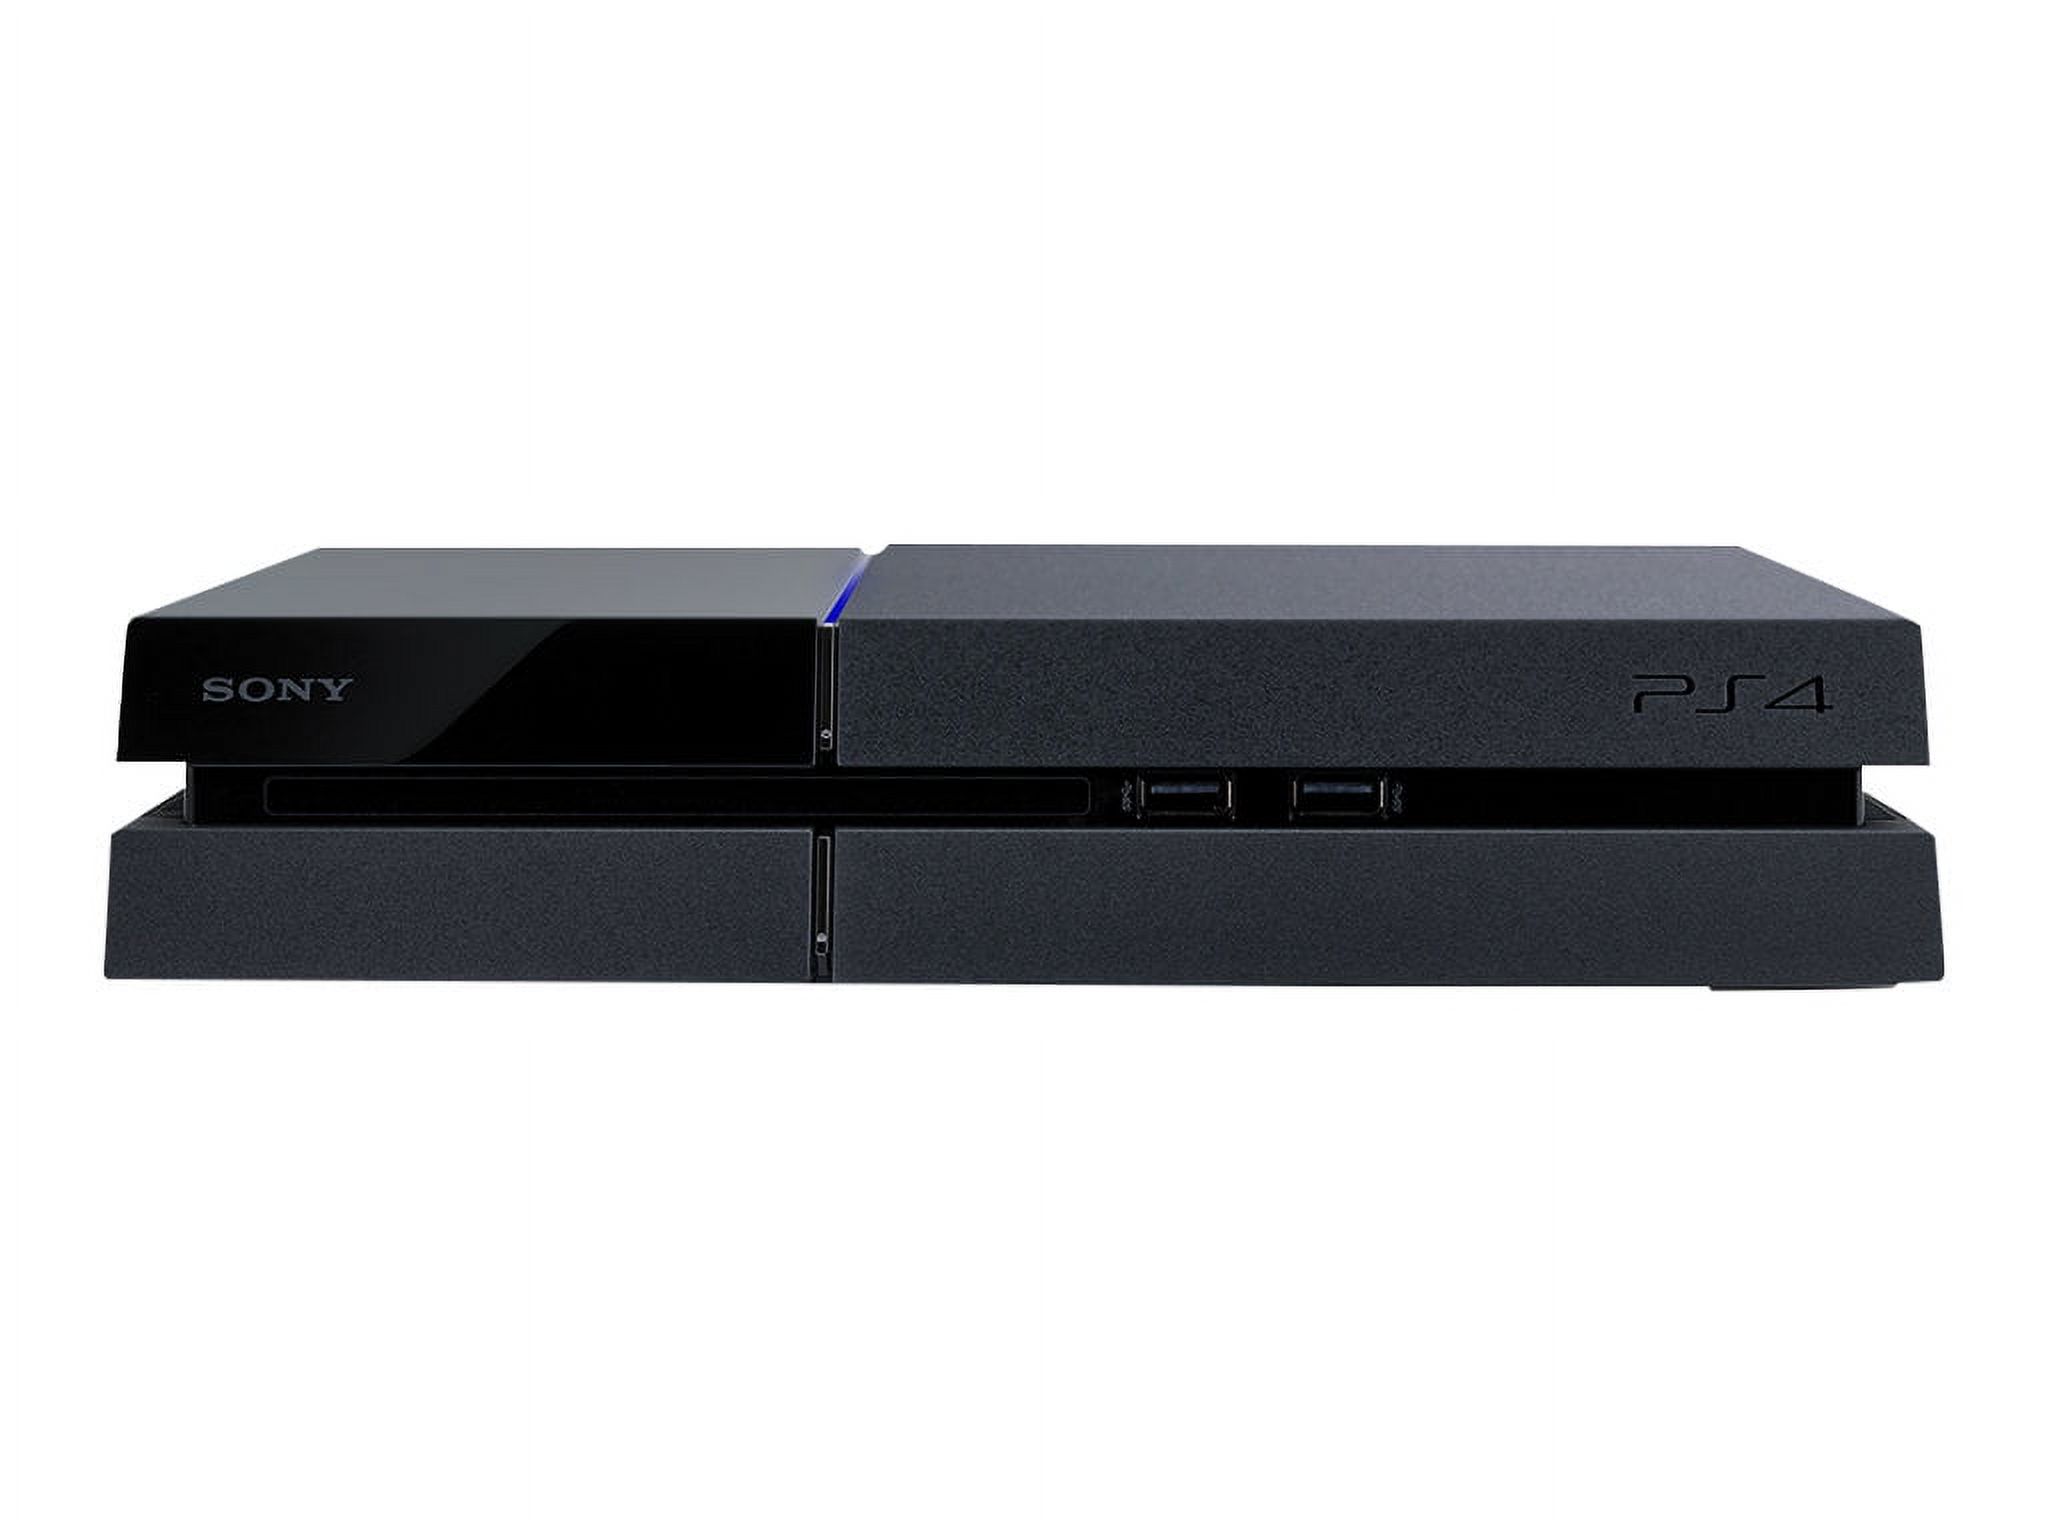 Sony PlayStation 4 Gaming Console - image 1 of 20